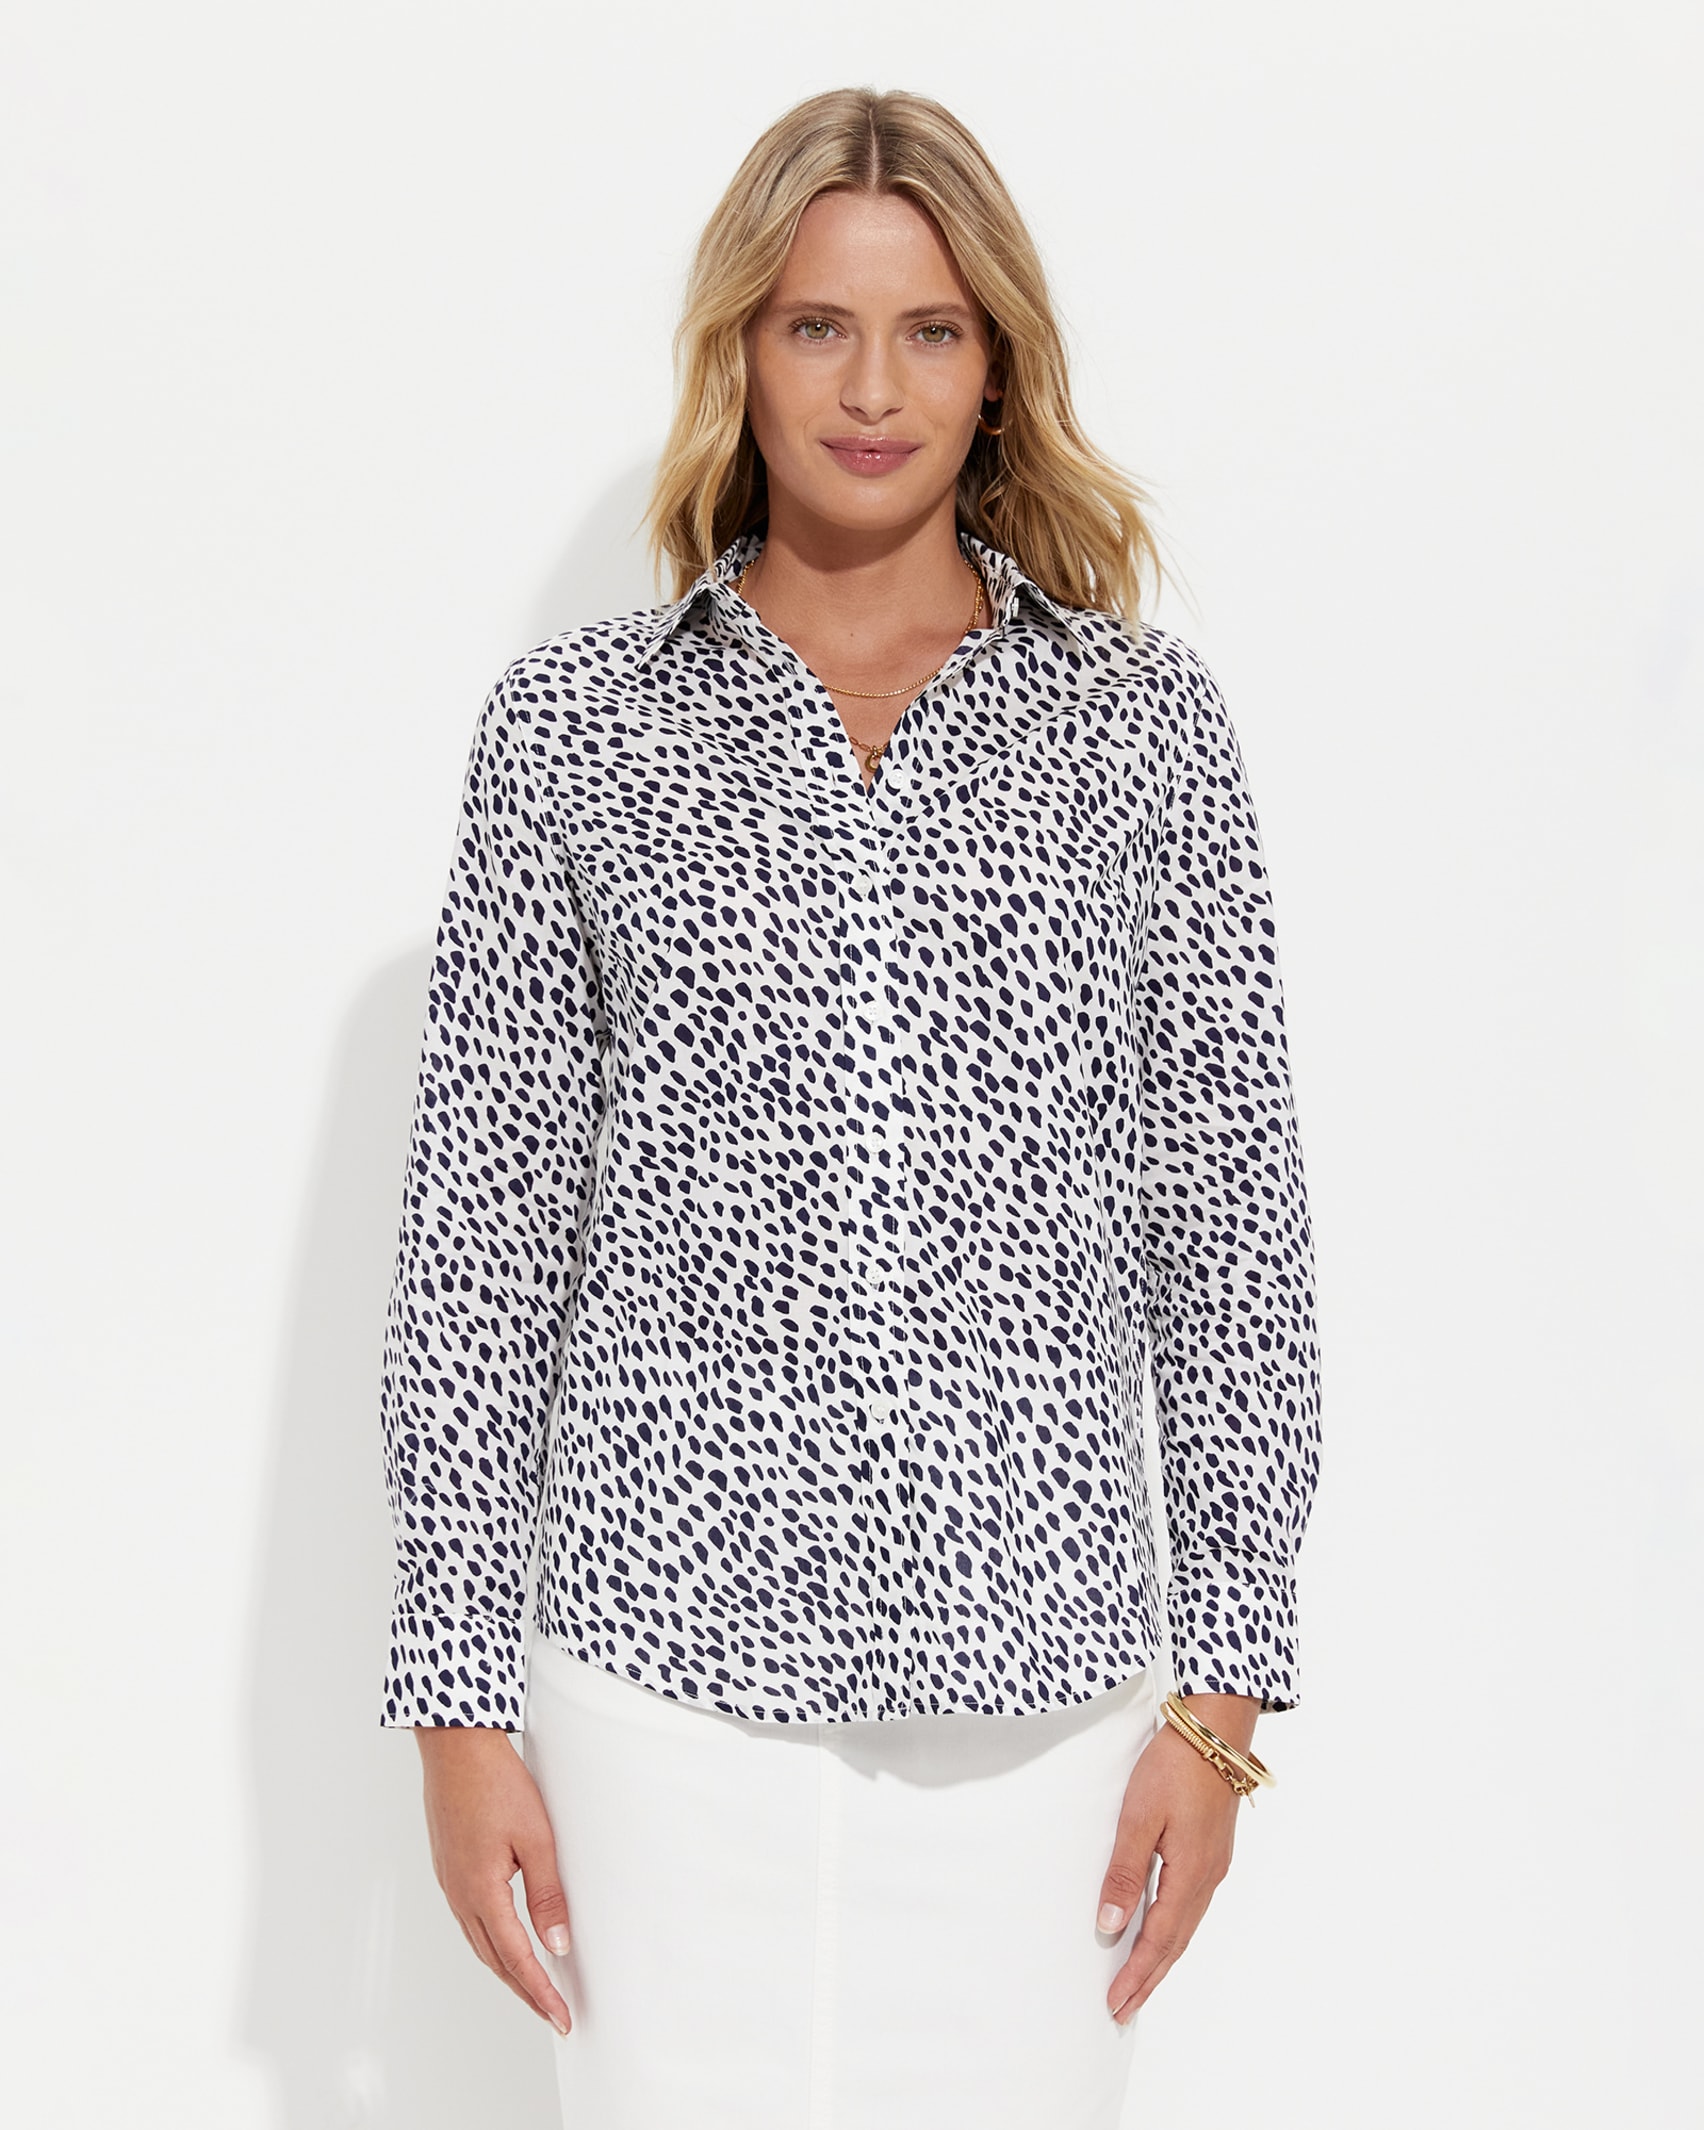 Dashed Lily Voile Shirt in WHITE/NAVY